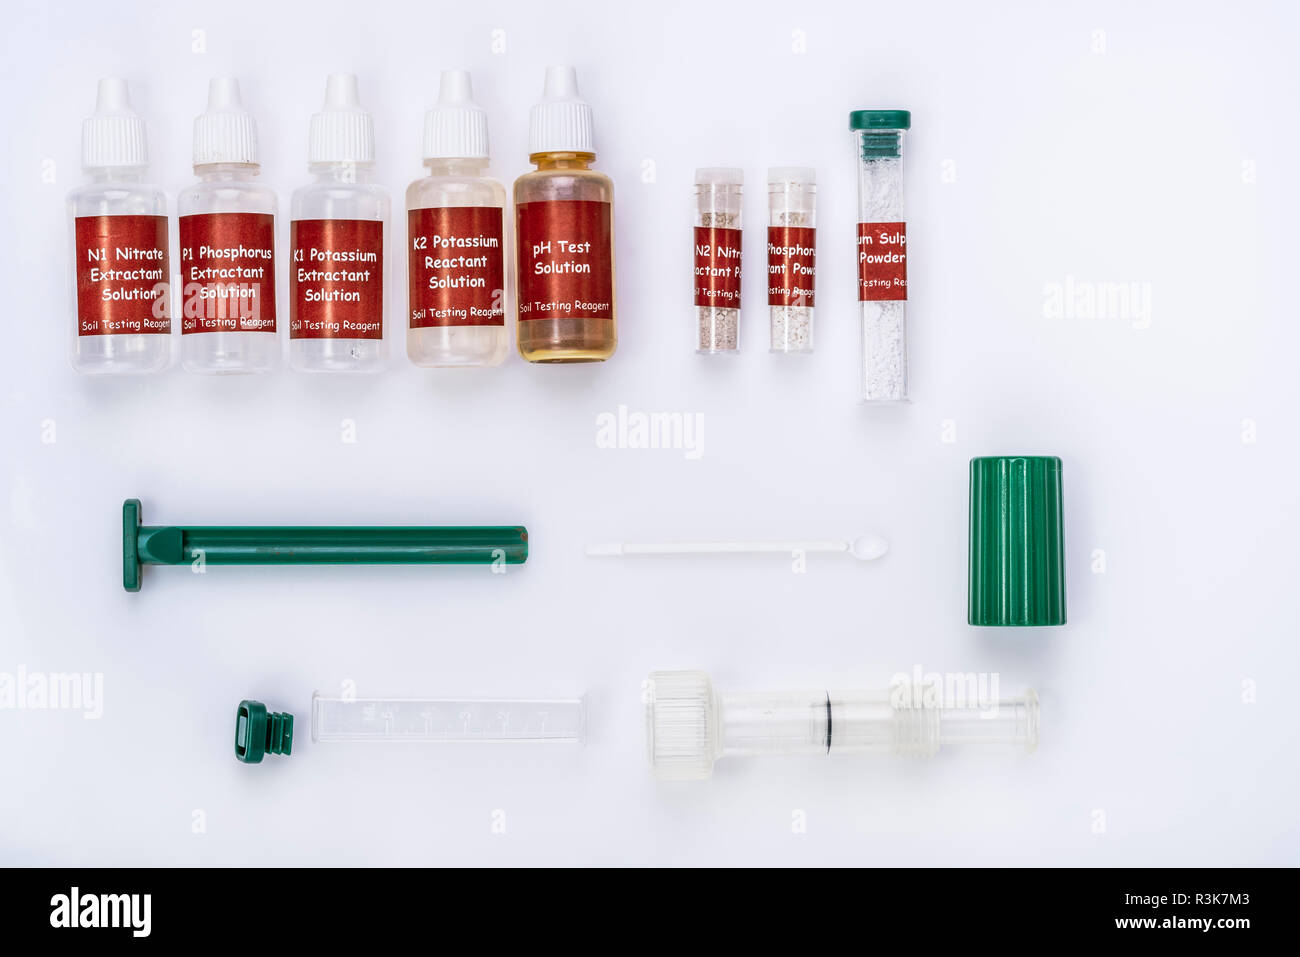 Soil Testing Kit with chemicals for testing potassium, nitrogen, phosphorus and acidity levels in soil. Stock Photo